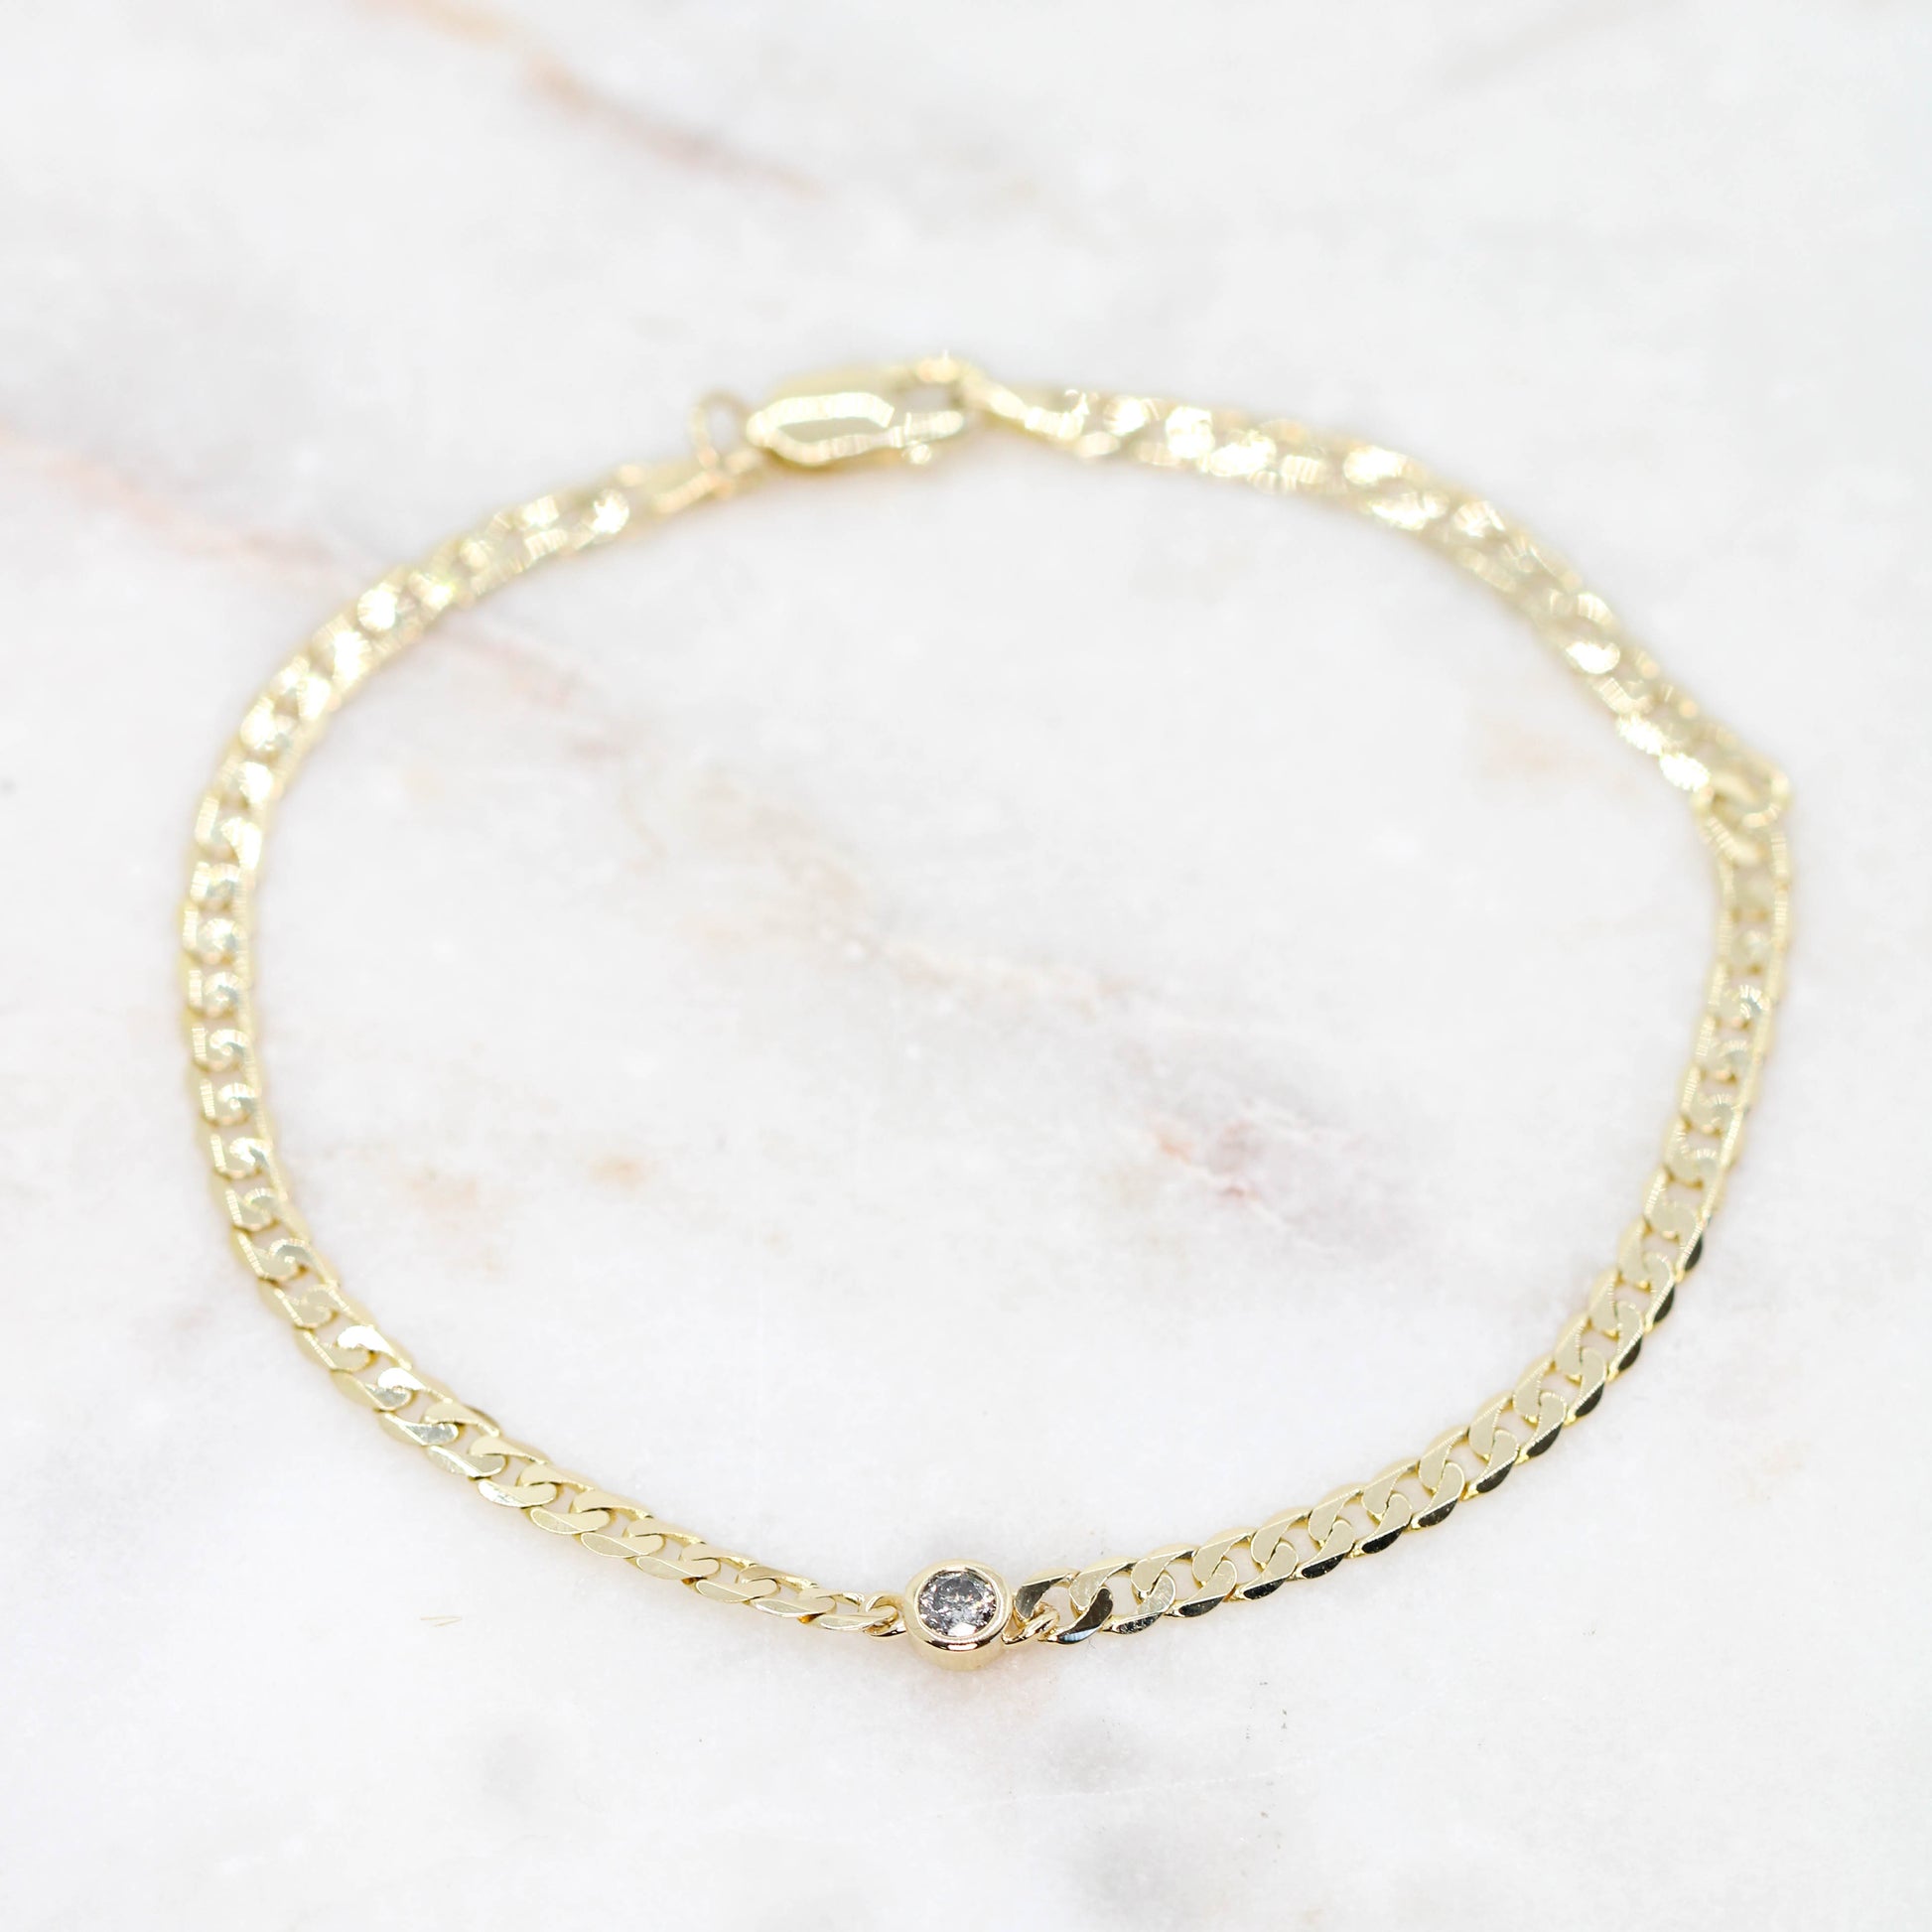 Solitaire Gray Celestial Diamond Bezel Set Curb Chain Bracelet - Made to Order, Your Choice of 14k Gold - Midwinter Co. Alternative Bridal Rings and Modern Fine Jewelry